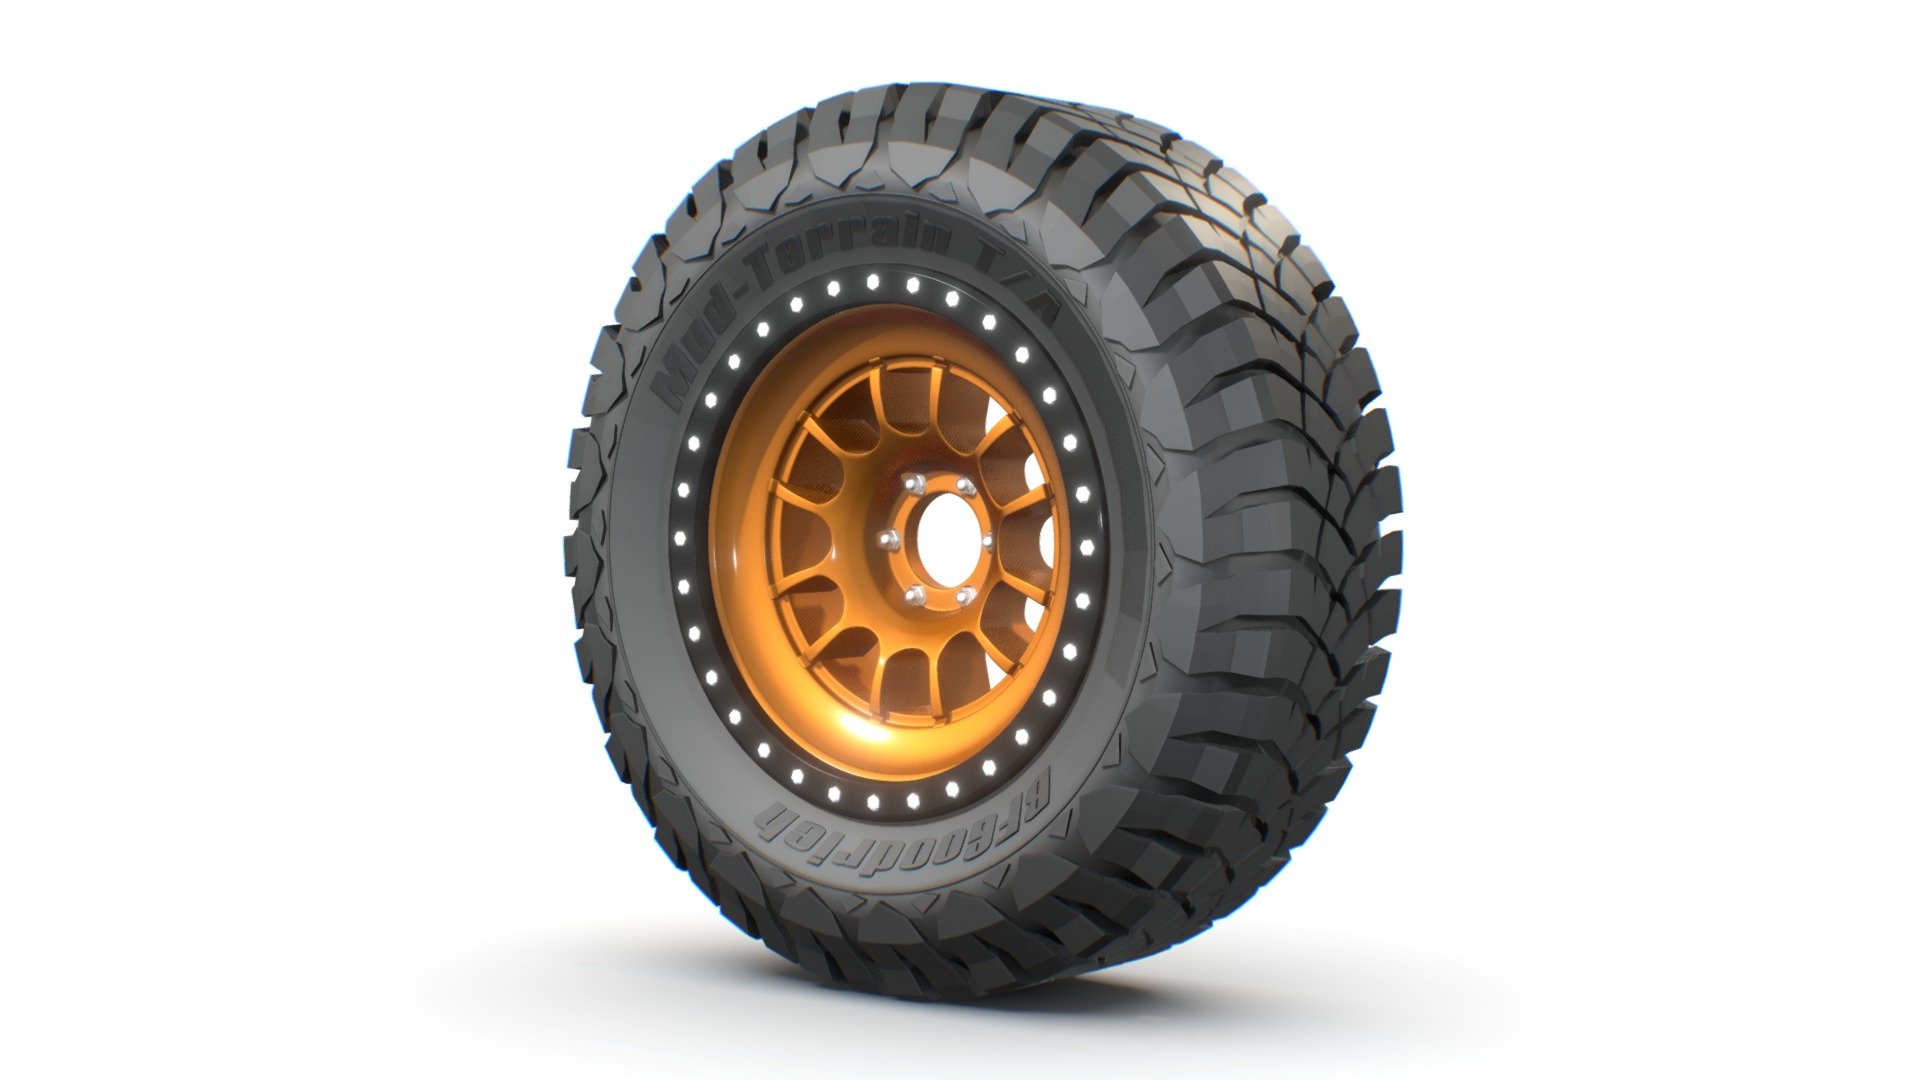 Offroad SUV wheel with BFGoodrich Mud-terrain Tire


Model with Blender 3.2
Cycles Render Engine used
Also usable with EEVEE render Engine
PBR Materials
No Textures
Can easily Edit the Materials
Clean Model

Suitable for


Any kind of SUVs with 6 studs

Just Download and use&hellip;

Thank You 3d model